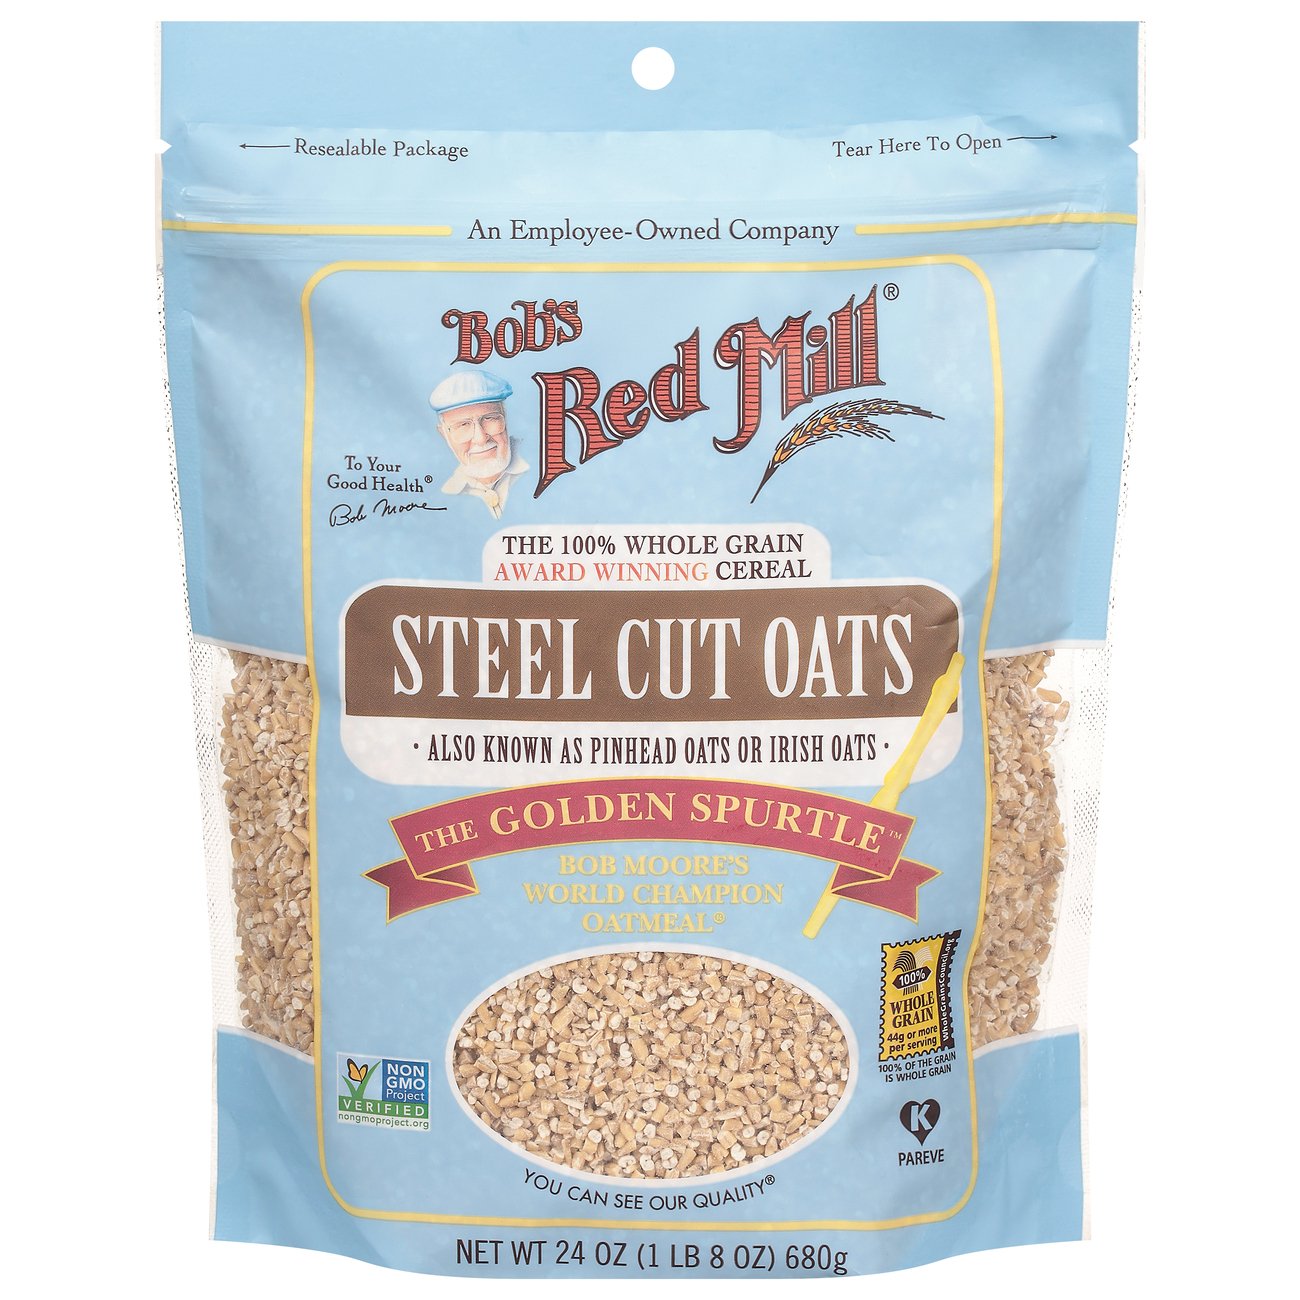 Bob's Red Mill Steel Cut Oats - & Hot Cereal at H-E-B